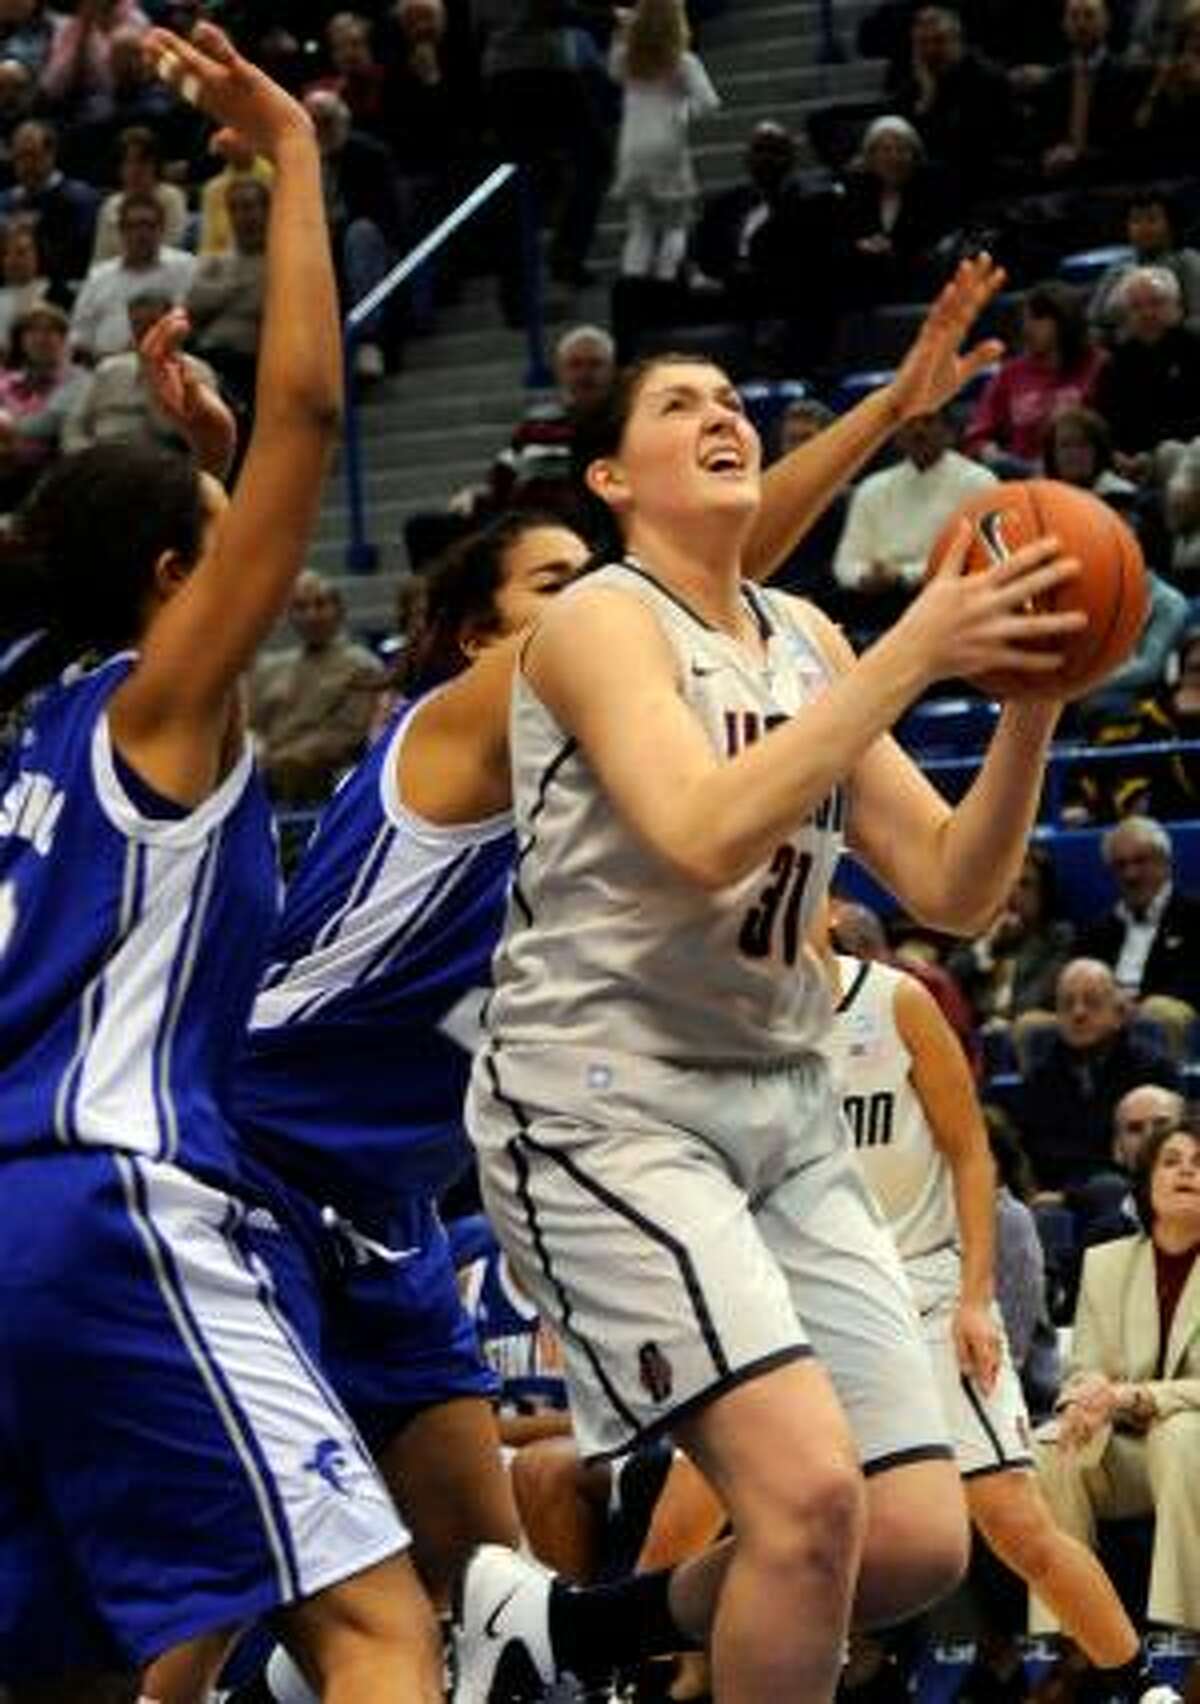 AP Connecticut's Stefanie Dolson comes in for a shot past Seton Hall defenders during the first half of Tuesday's game in Hartford. The Huskies won 80-59.